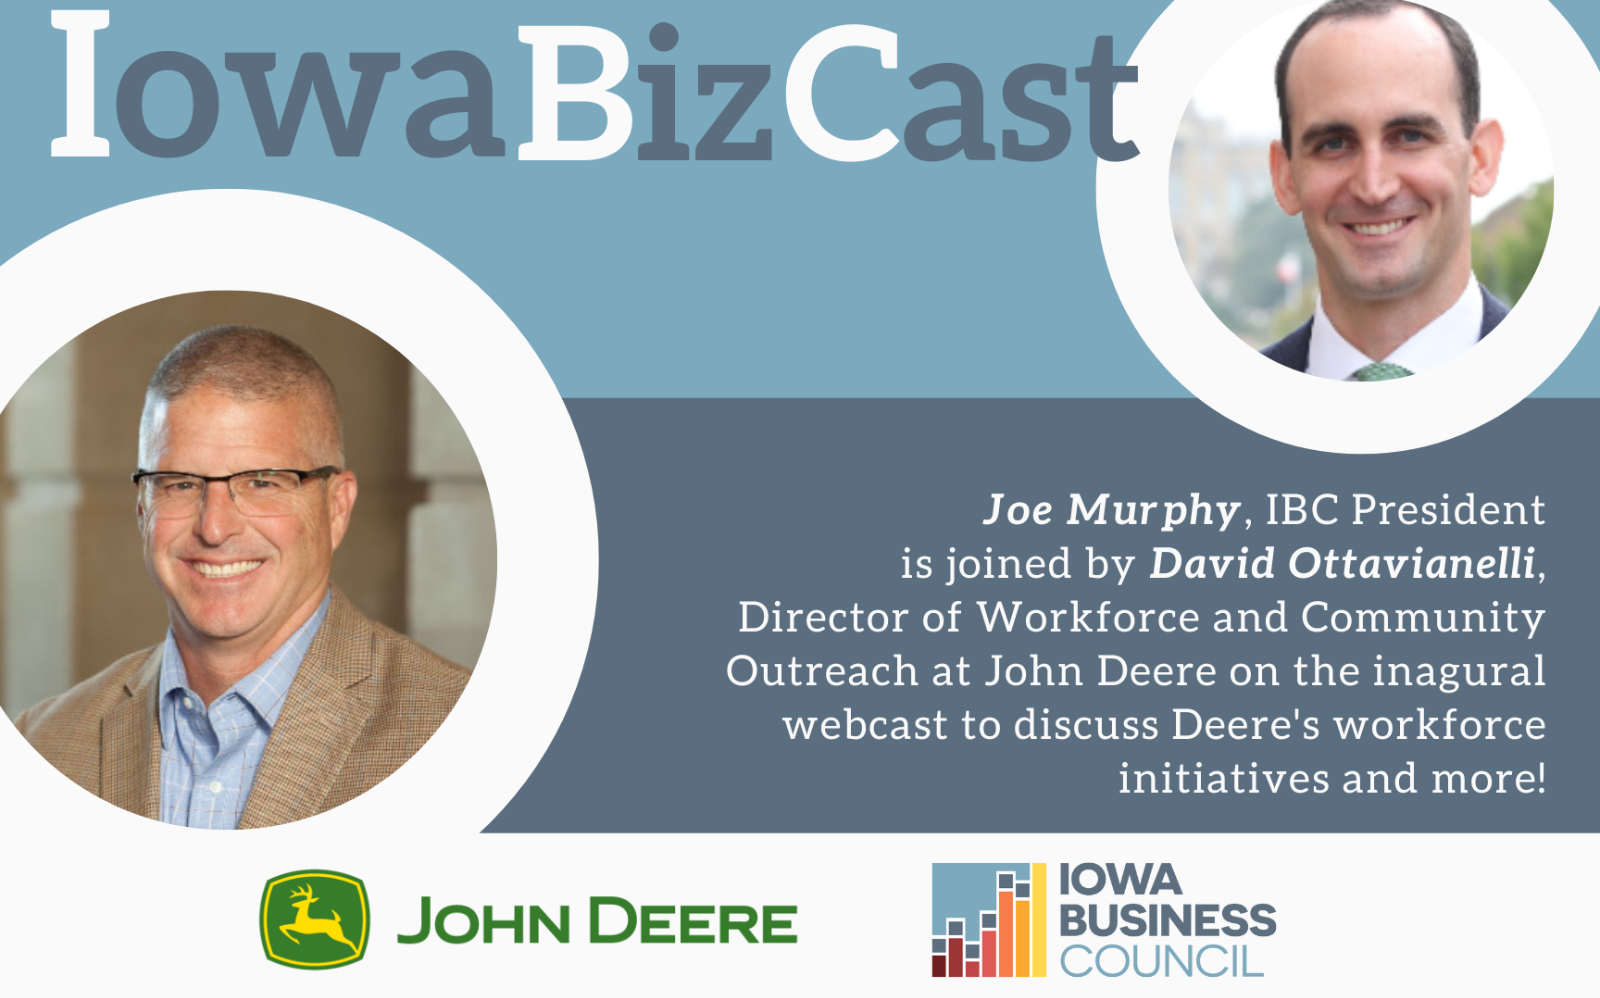 Register for the Iowa Biz Cast LIVE Webcast Here